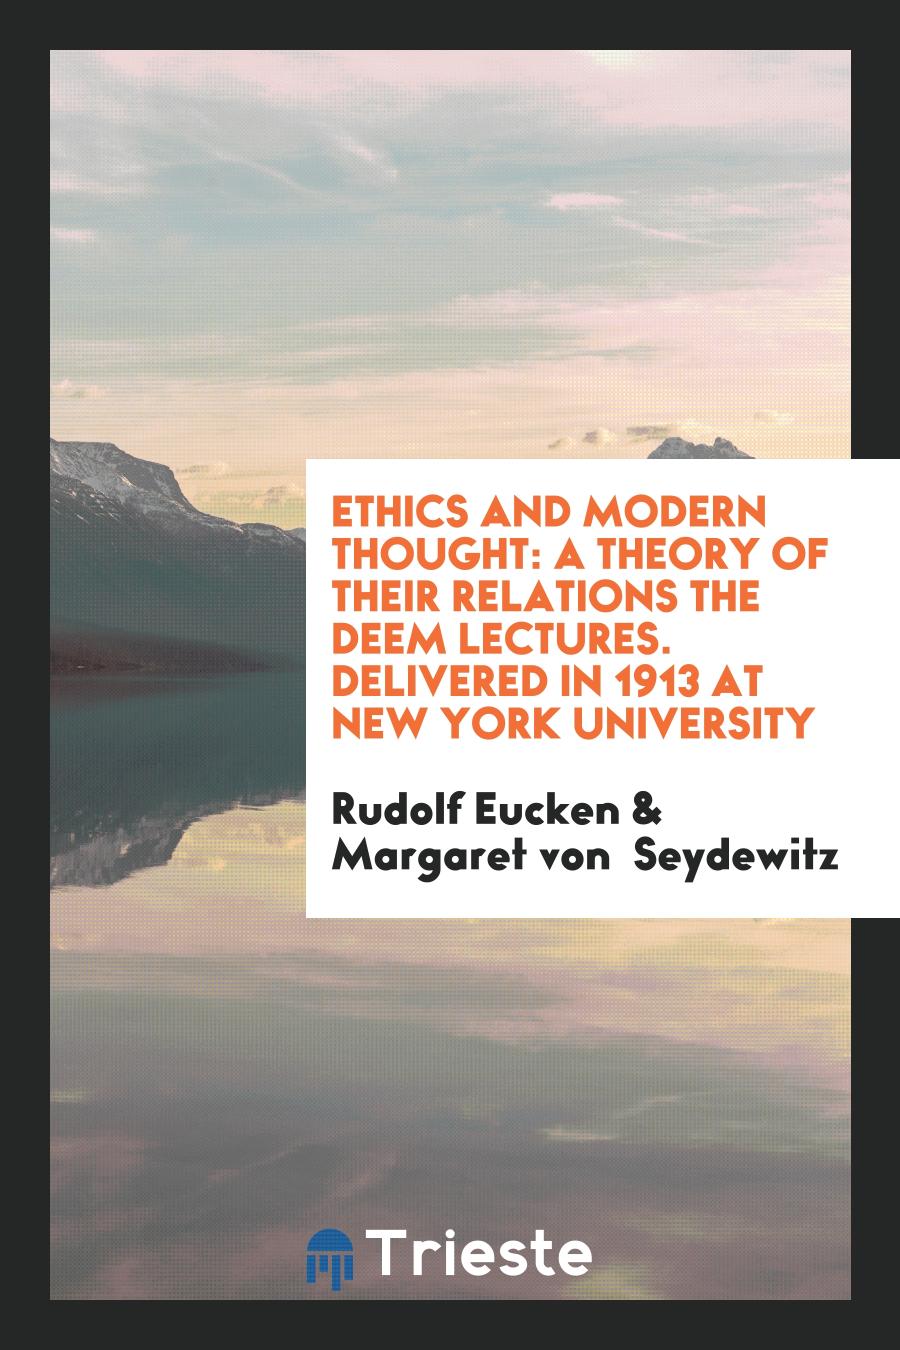 Ethics and Modern Thought: A Theory of Their Relations the Deem Lectures. Delivered in 1913 at New York University